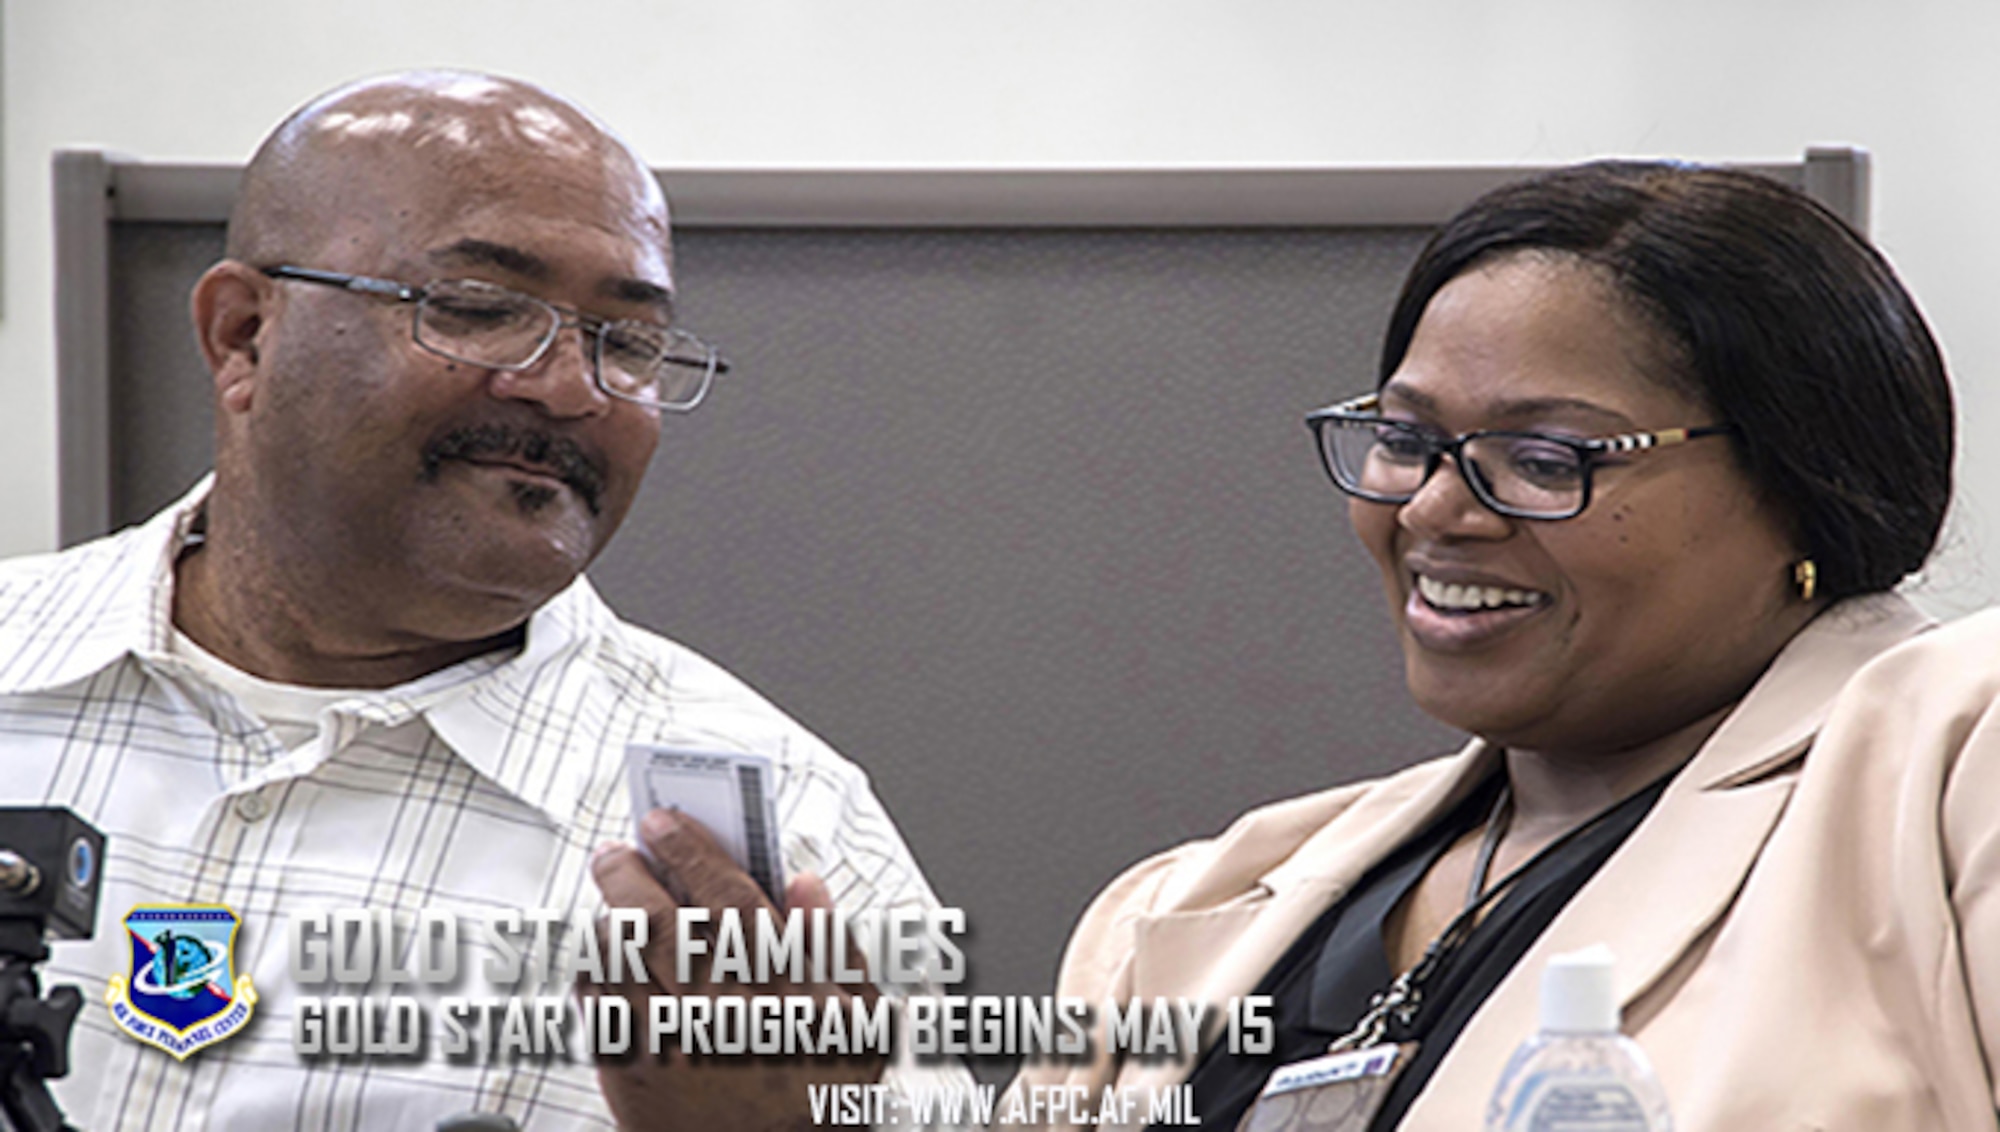 Michael L. Chavis, a Gold Star parent, shows his new Gold Star Base Access ID card to Carla Diamond, a U.S. Air Force Headquarters community readiness consultant, at Joint Base Andrews, Md., May 1, 2017. These cards are part of an Air Force initiative allowing Gold Star family members, immediate relatives of deceased Airmen, unescorted access to Air Force installations to visit buried loved ones, attend base events, and stop by Airmen and mily Readiness Centers for support. (U.S. Air Force photo/Senior Airman Jordyn Fetter)